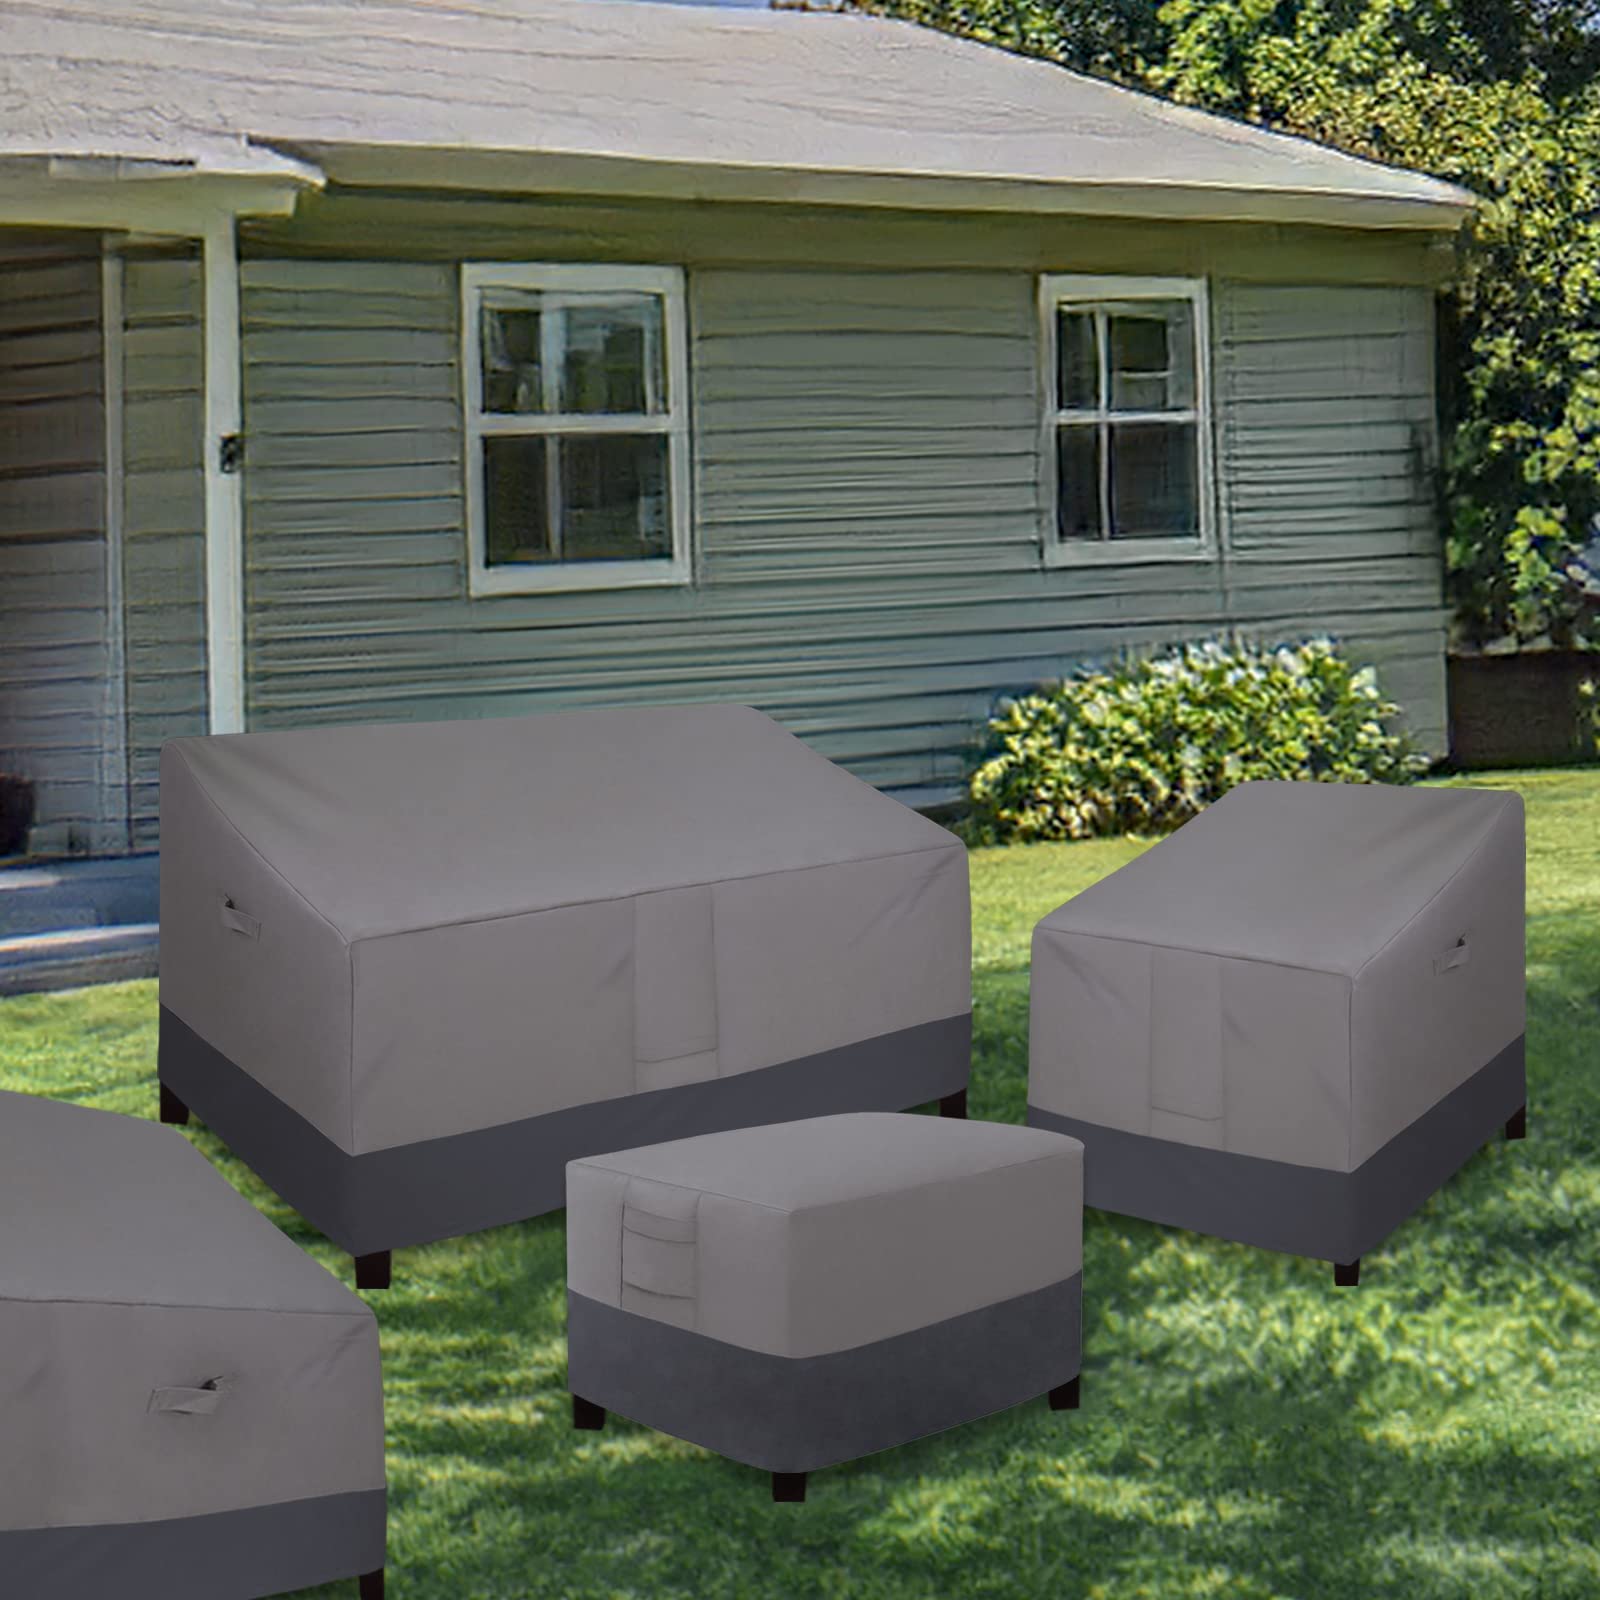 Easy-Going Outdoor Ottoman Cover, Waterproof Patio Ottoman Cover, Heavy Duty Outdoor Furniture Cover with Padded Handles (33"x33"x17", Gray/Dark Gray)